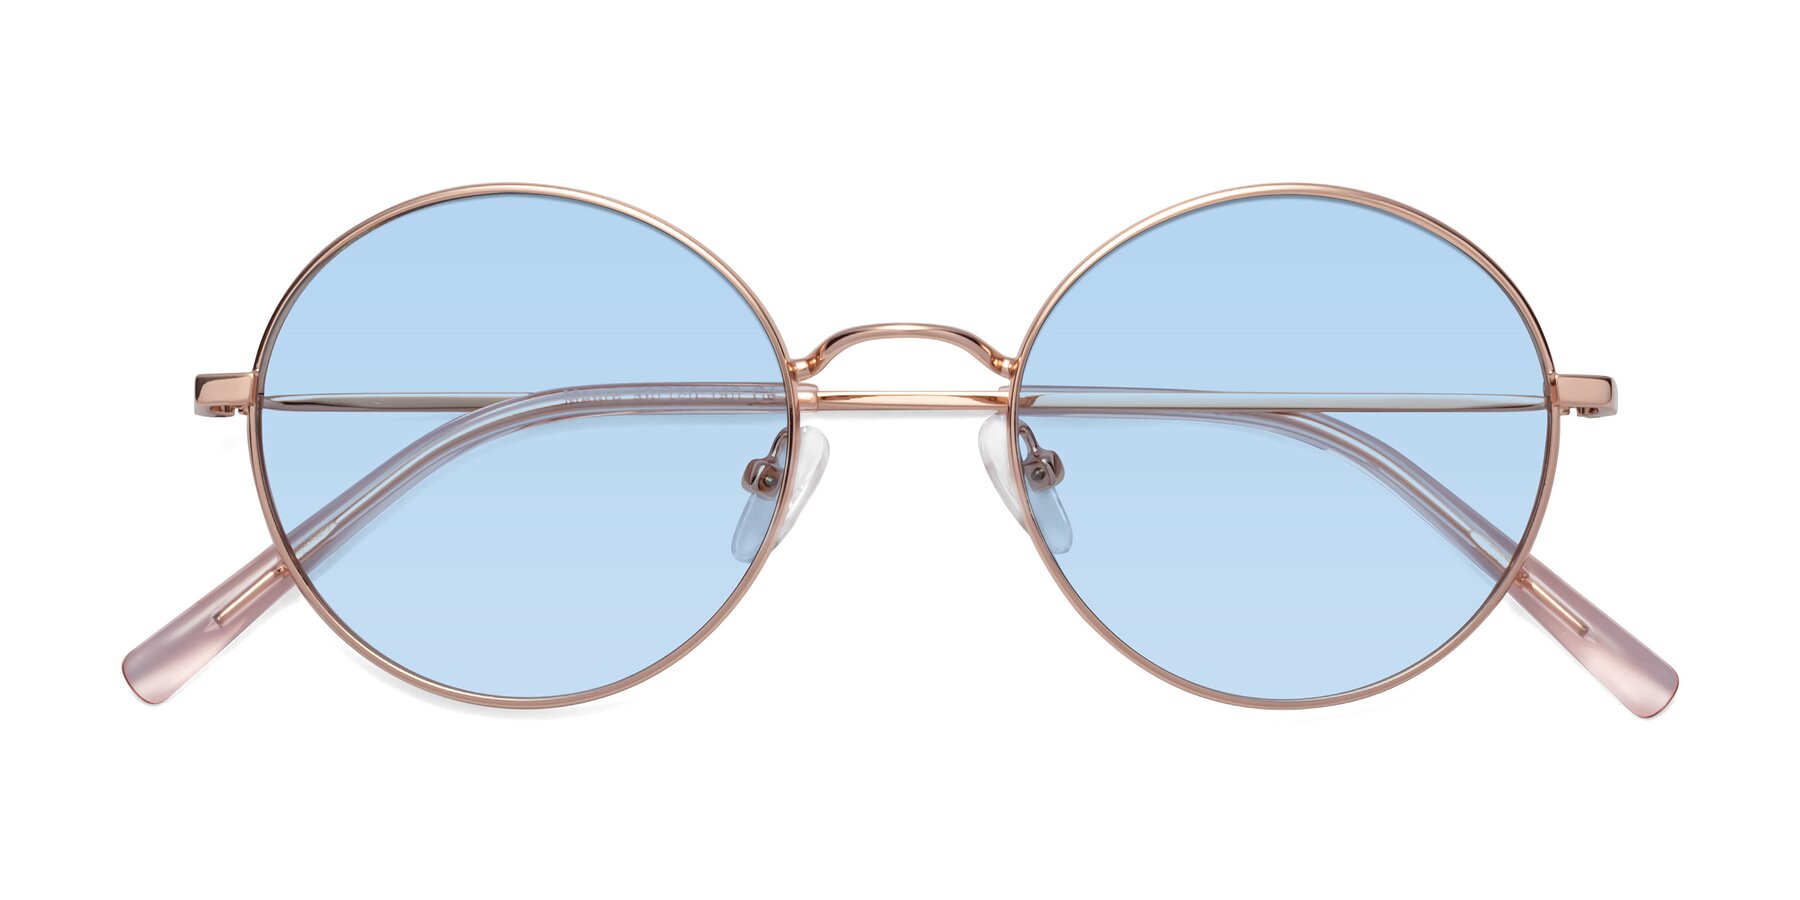 Round Vintage Sunglasses with Blue Lenses and Gold Frames